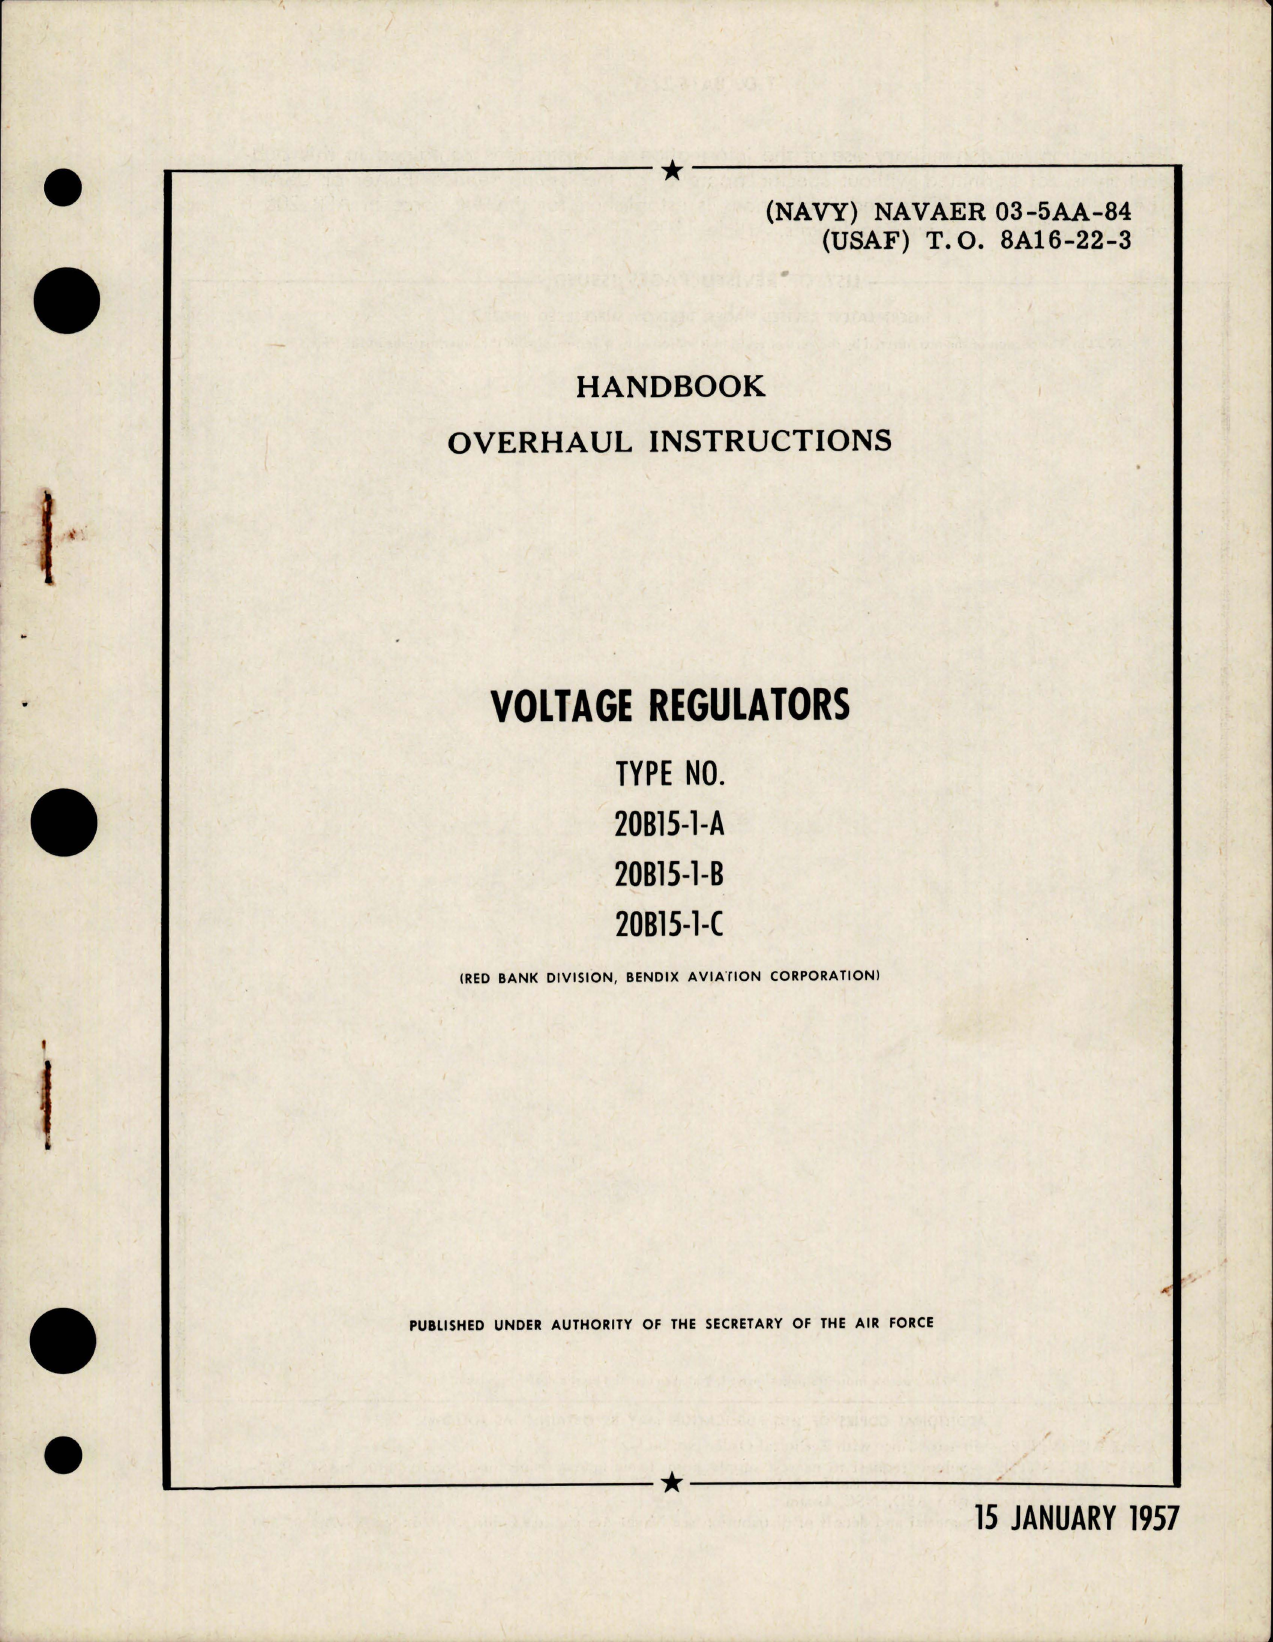 Sample page 1 from AirCorps Library document: Overhaul Instructions for Voltage Regulators - Types 20B15-1-A, 20B15-1-B, and 20B15-1-C 